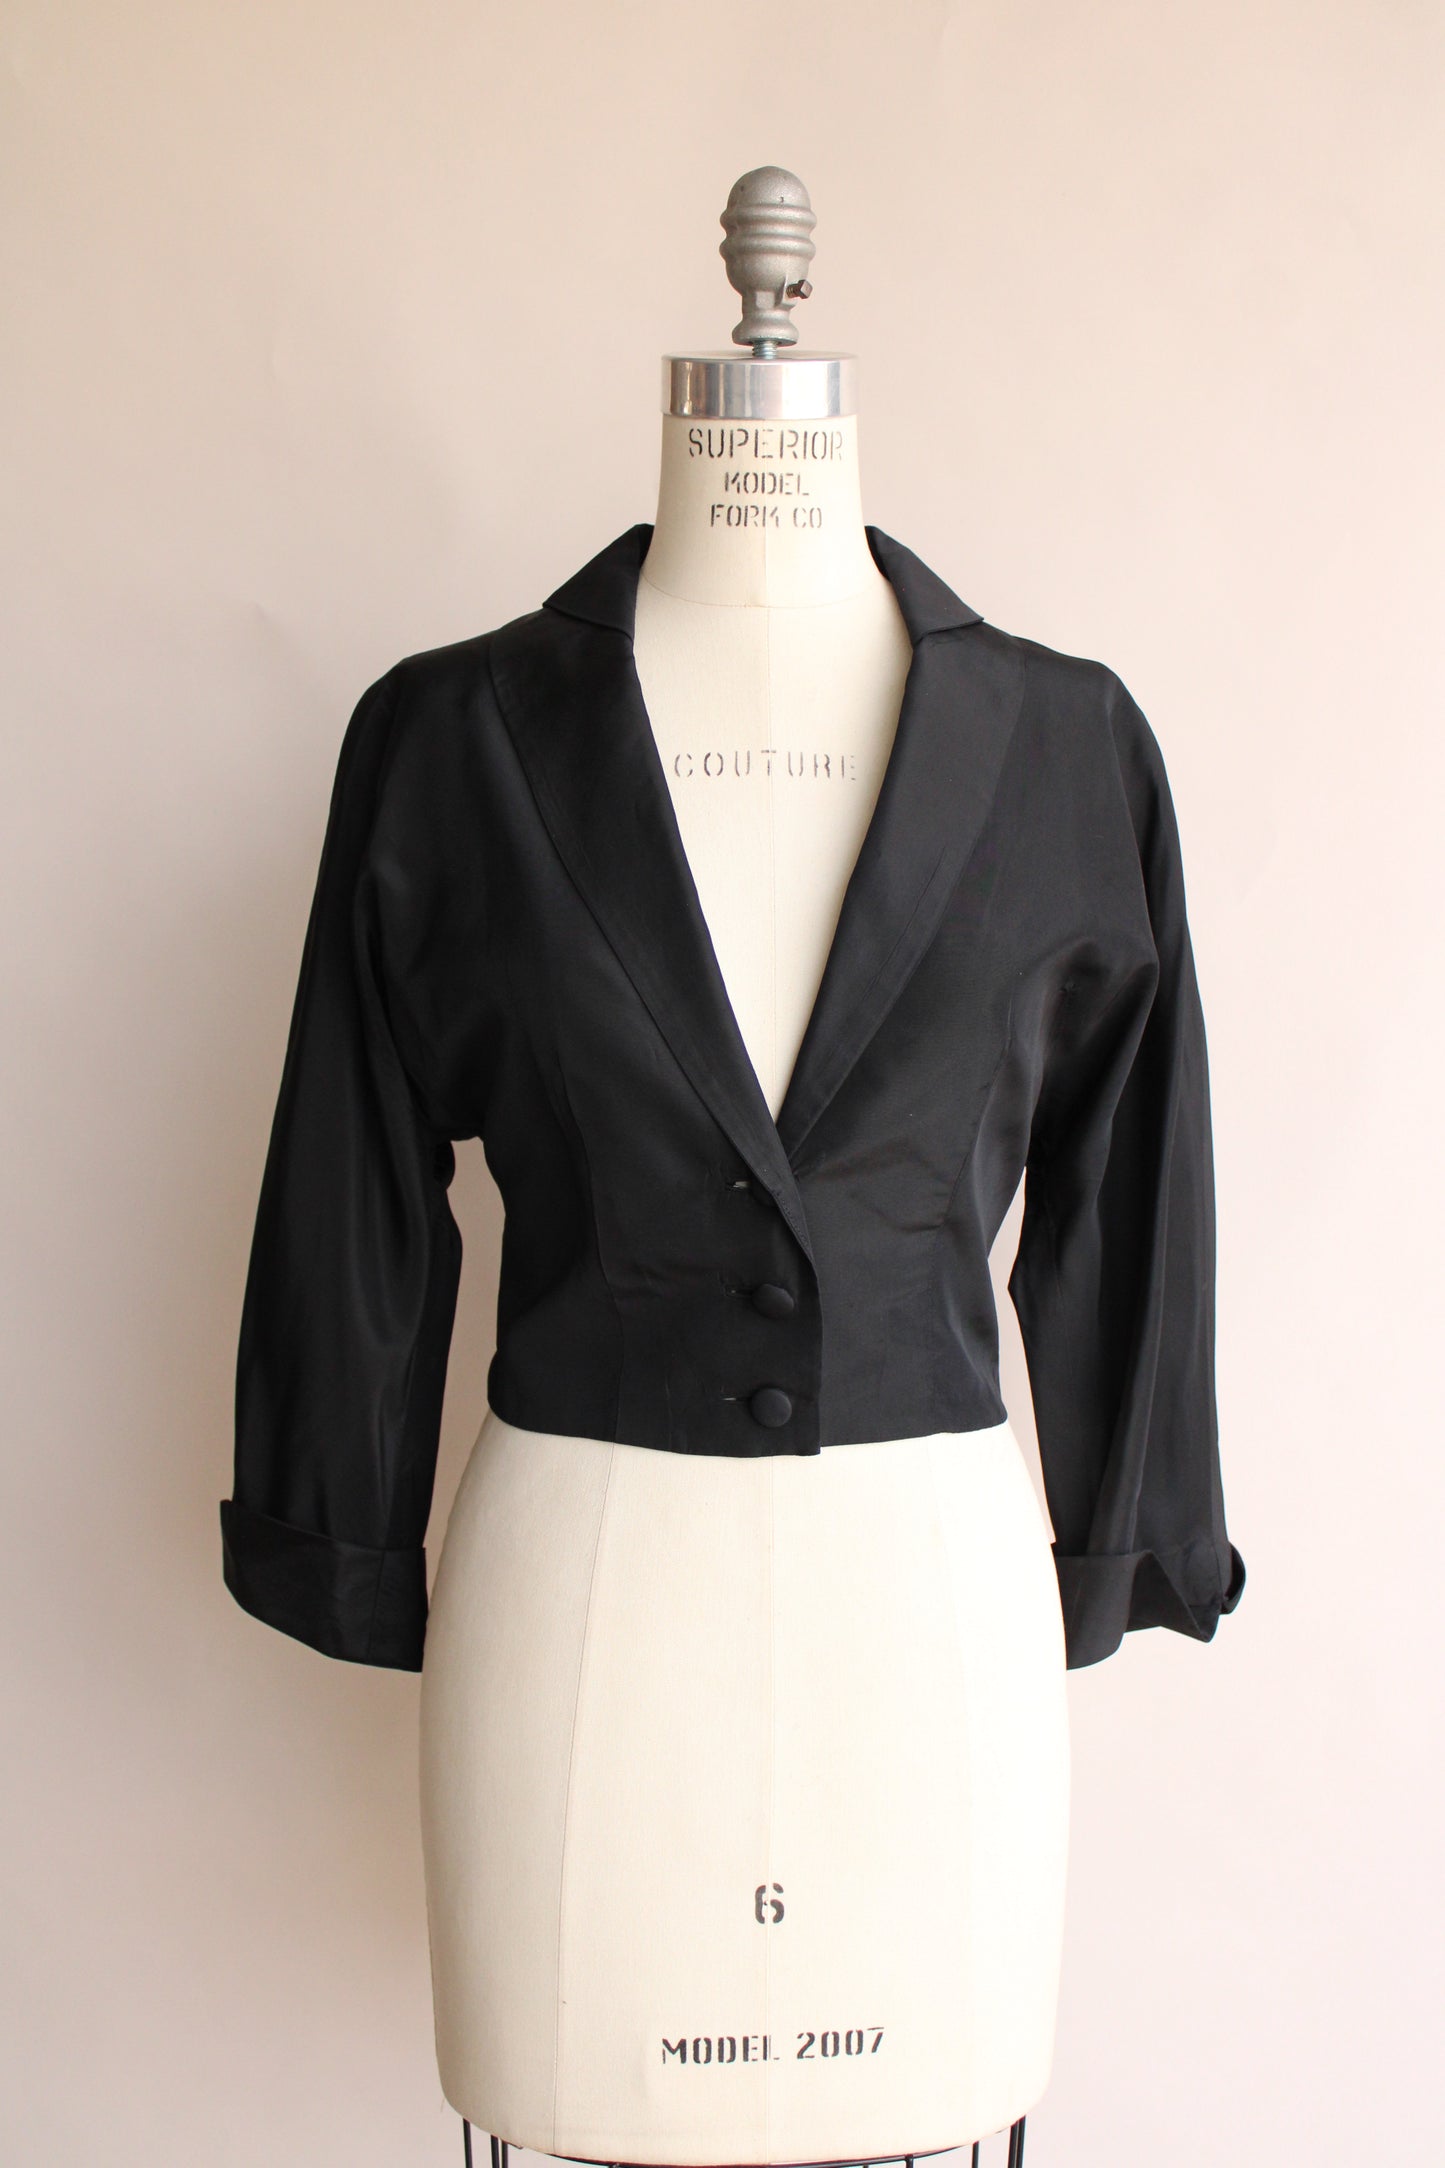 Vintage 1950s New Look Black and Pink Dress with Jacket